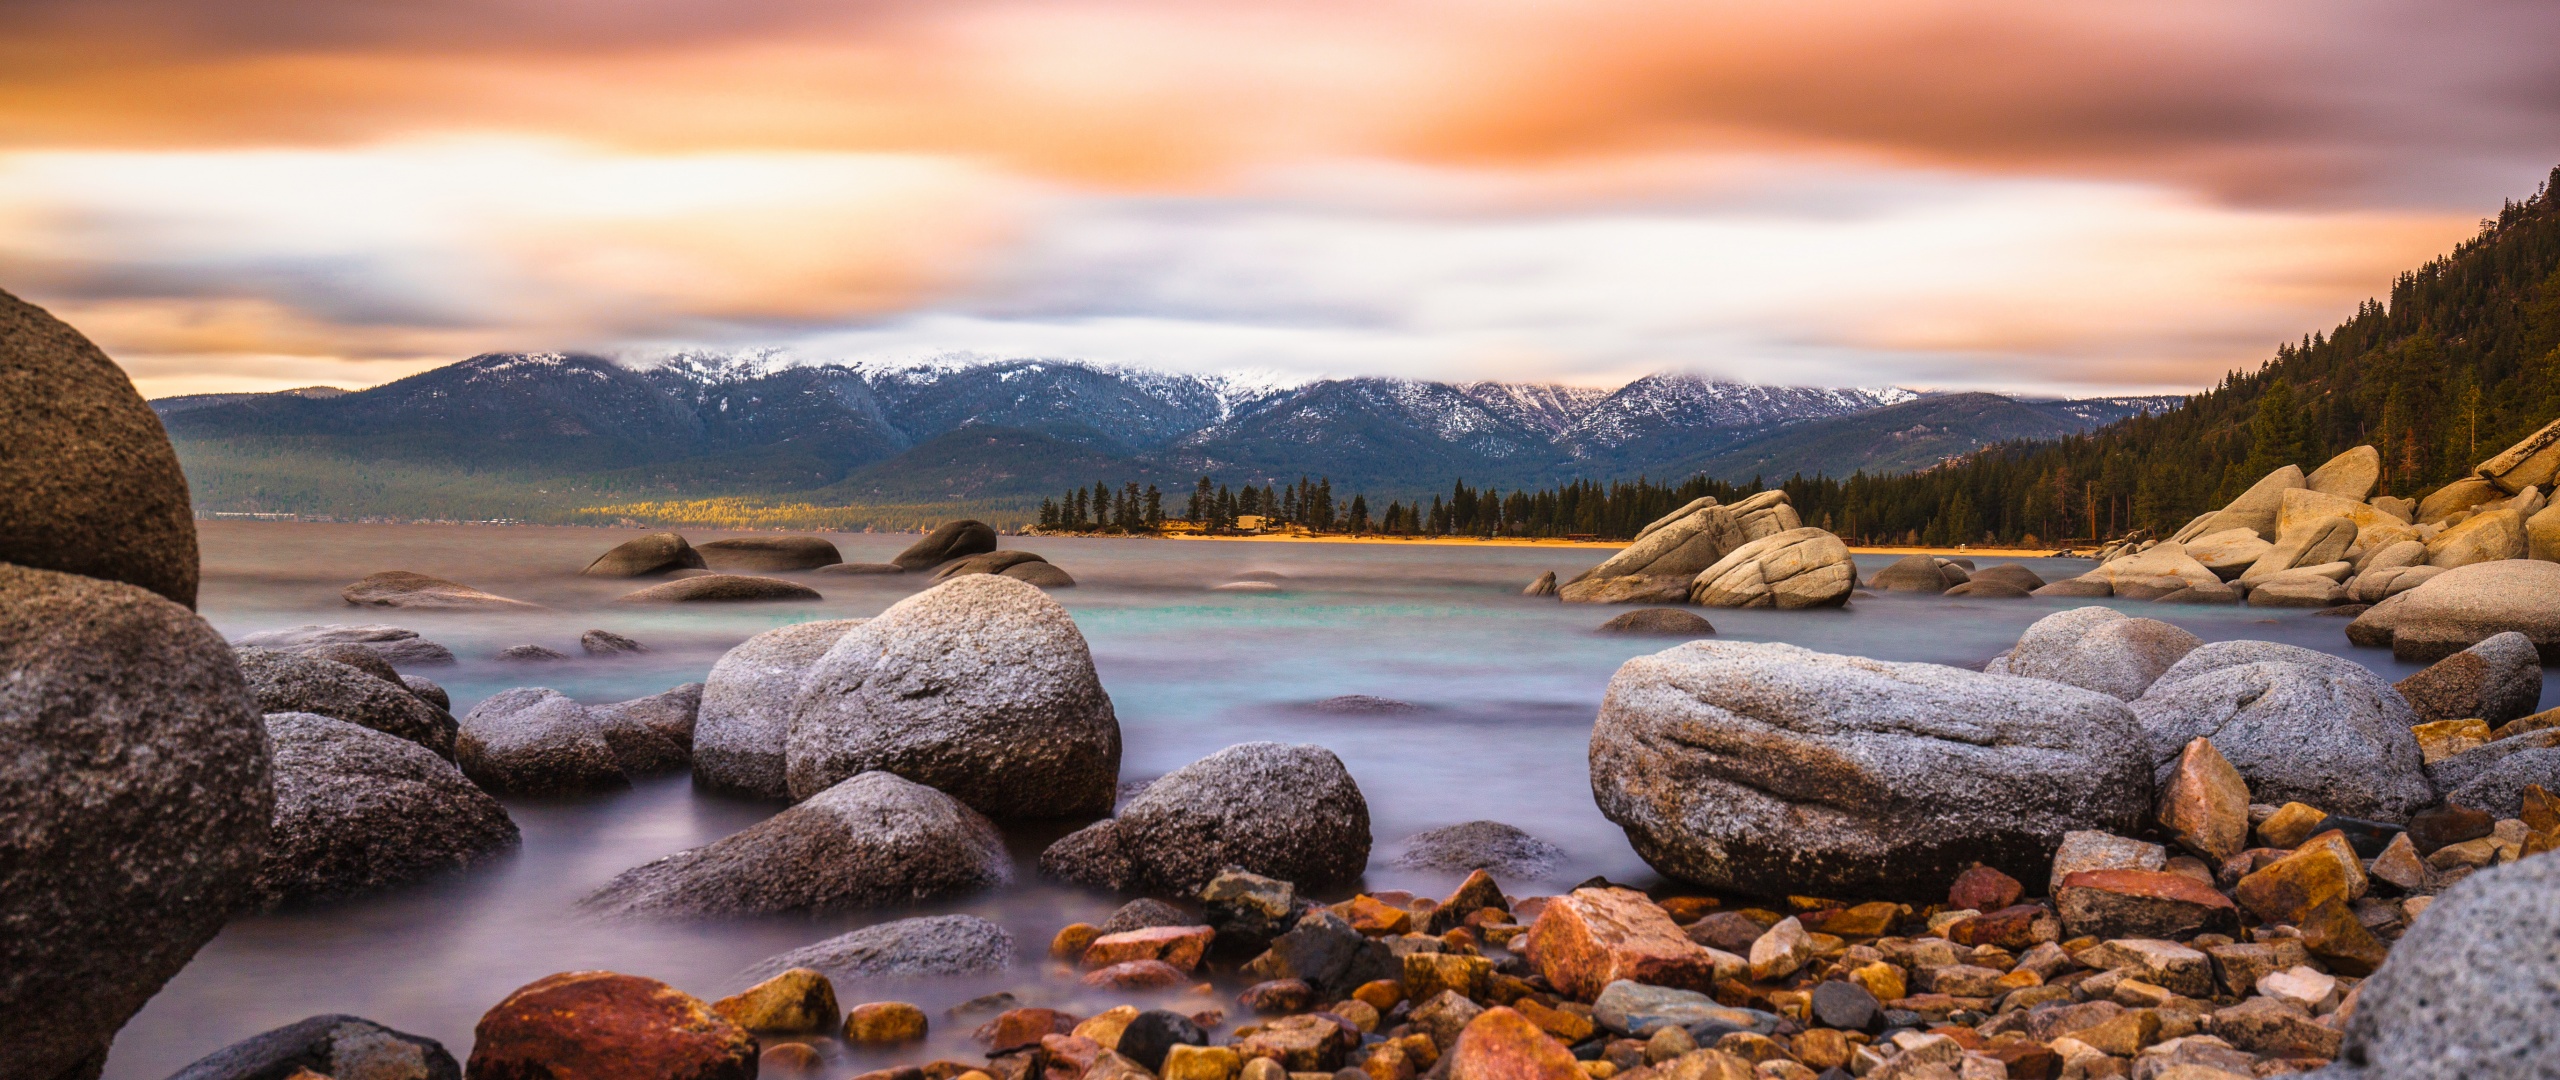 Photo Dump from Lake Tahoe, California — Snows Out West